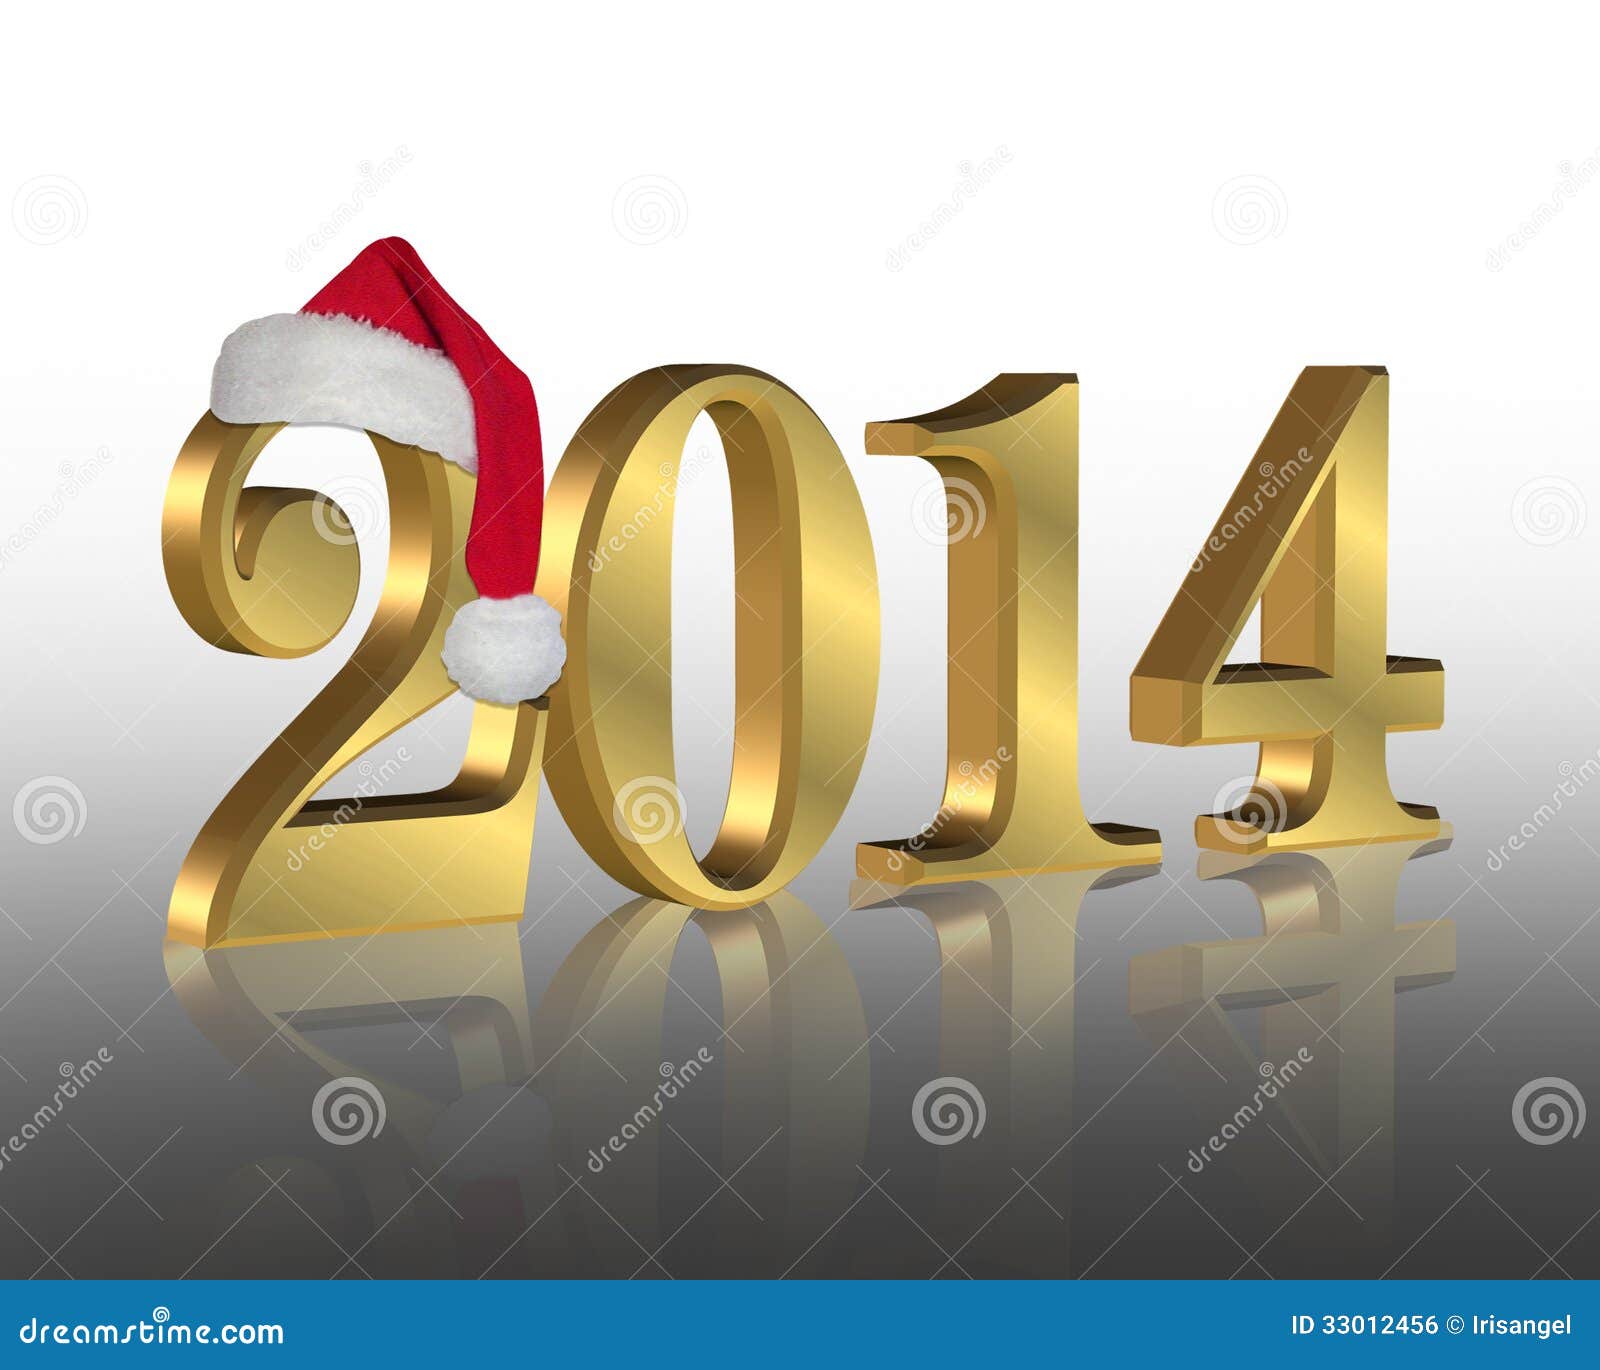 clipart new years eve 2014 - photo #24